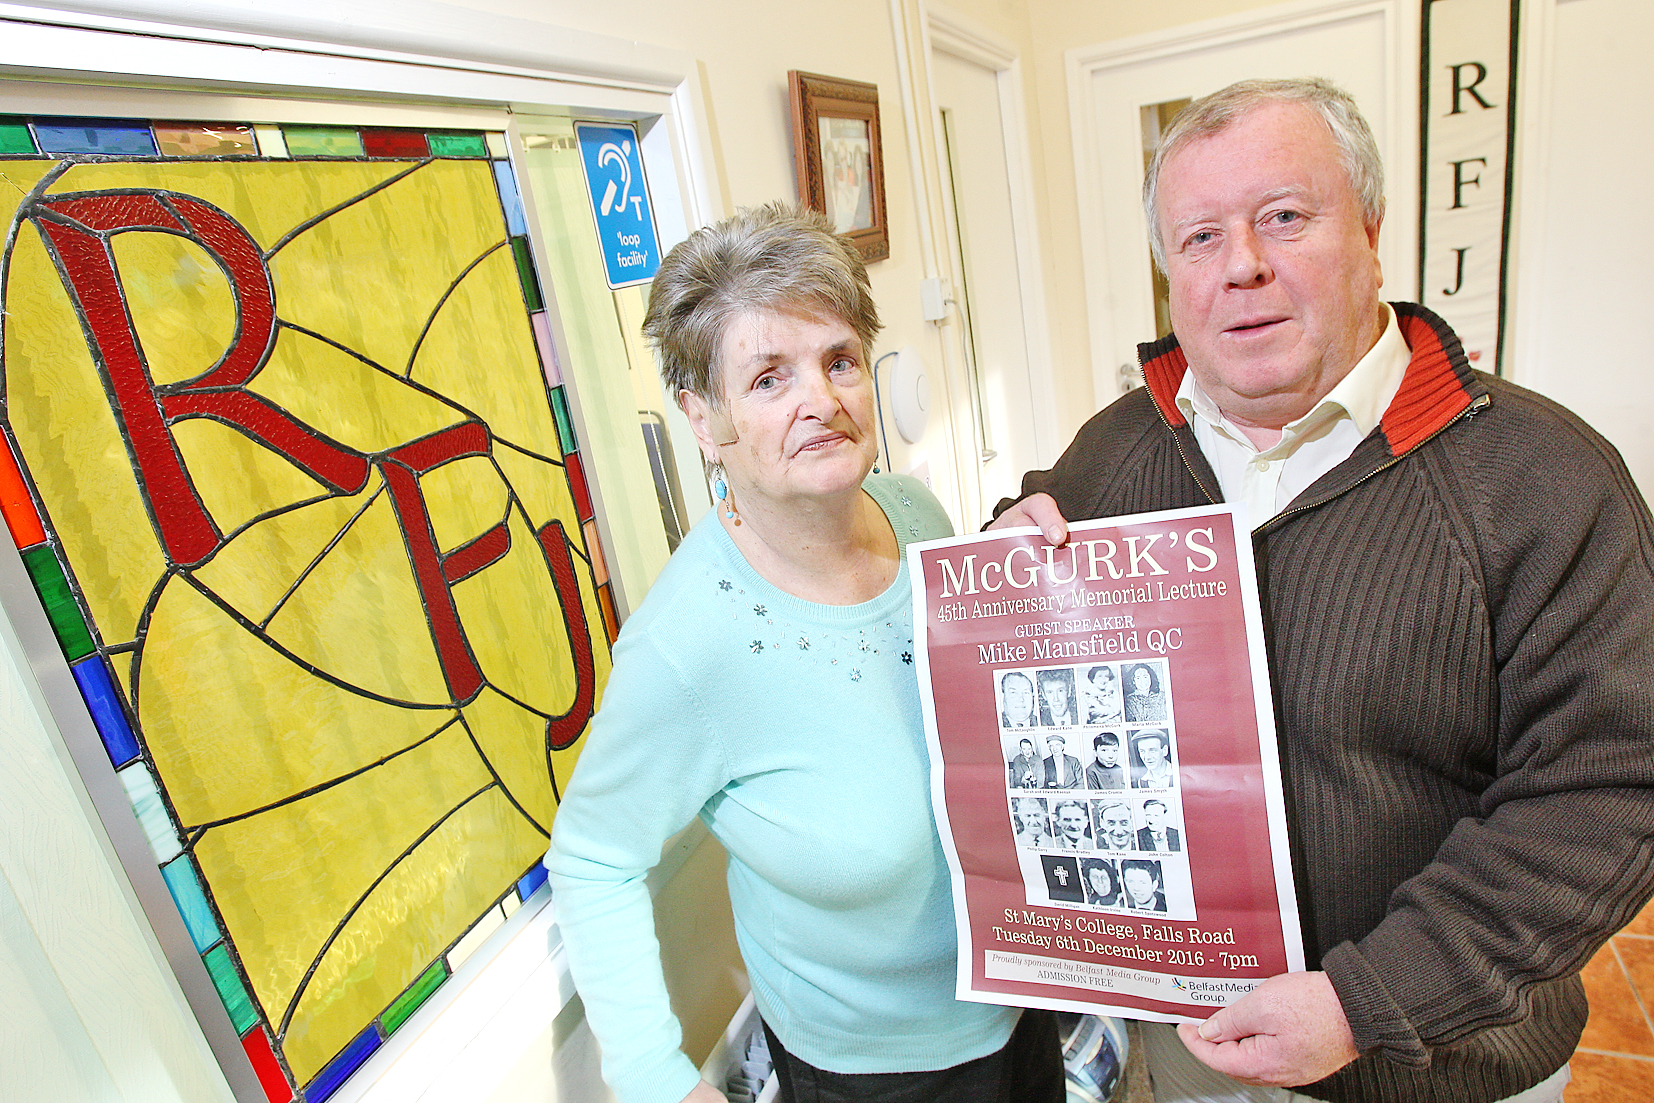 Robert McClenaghan and Clara Reilly from Relatives for Justice